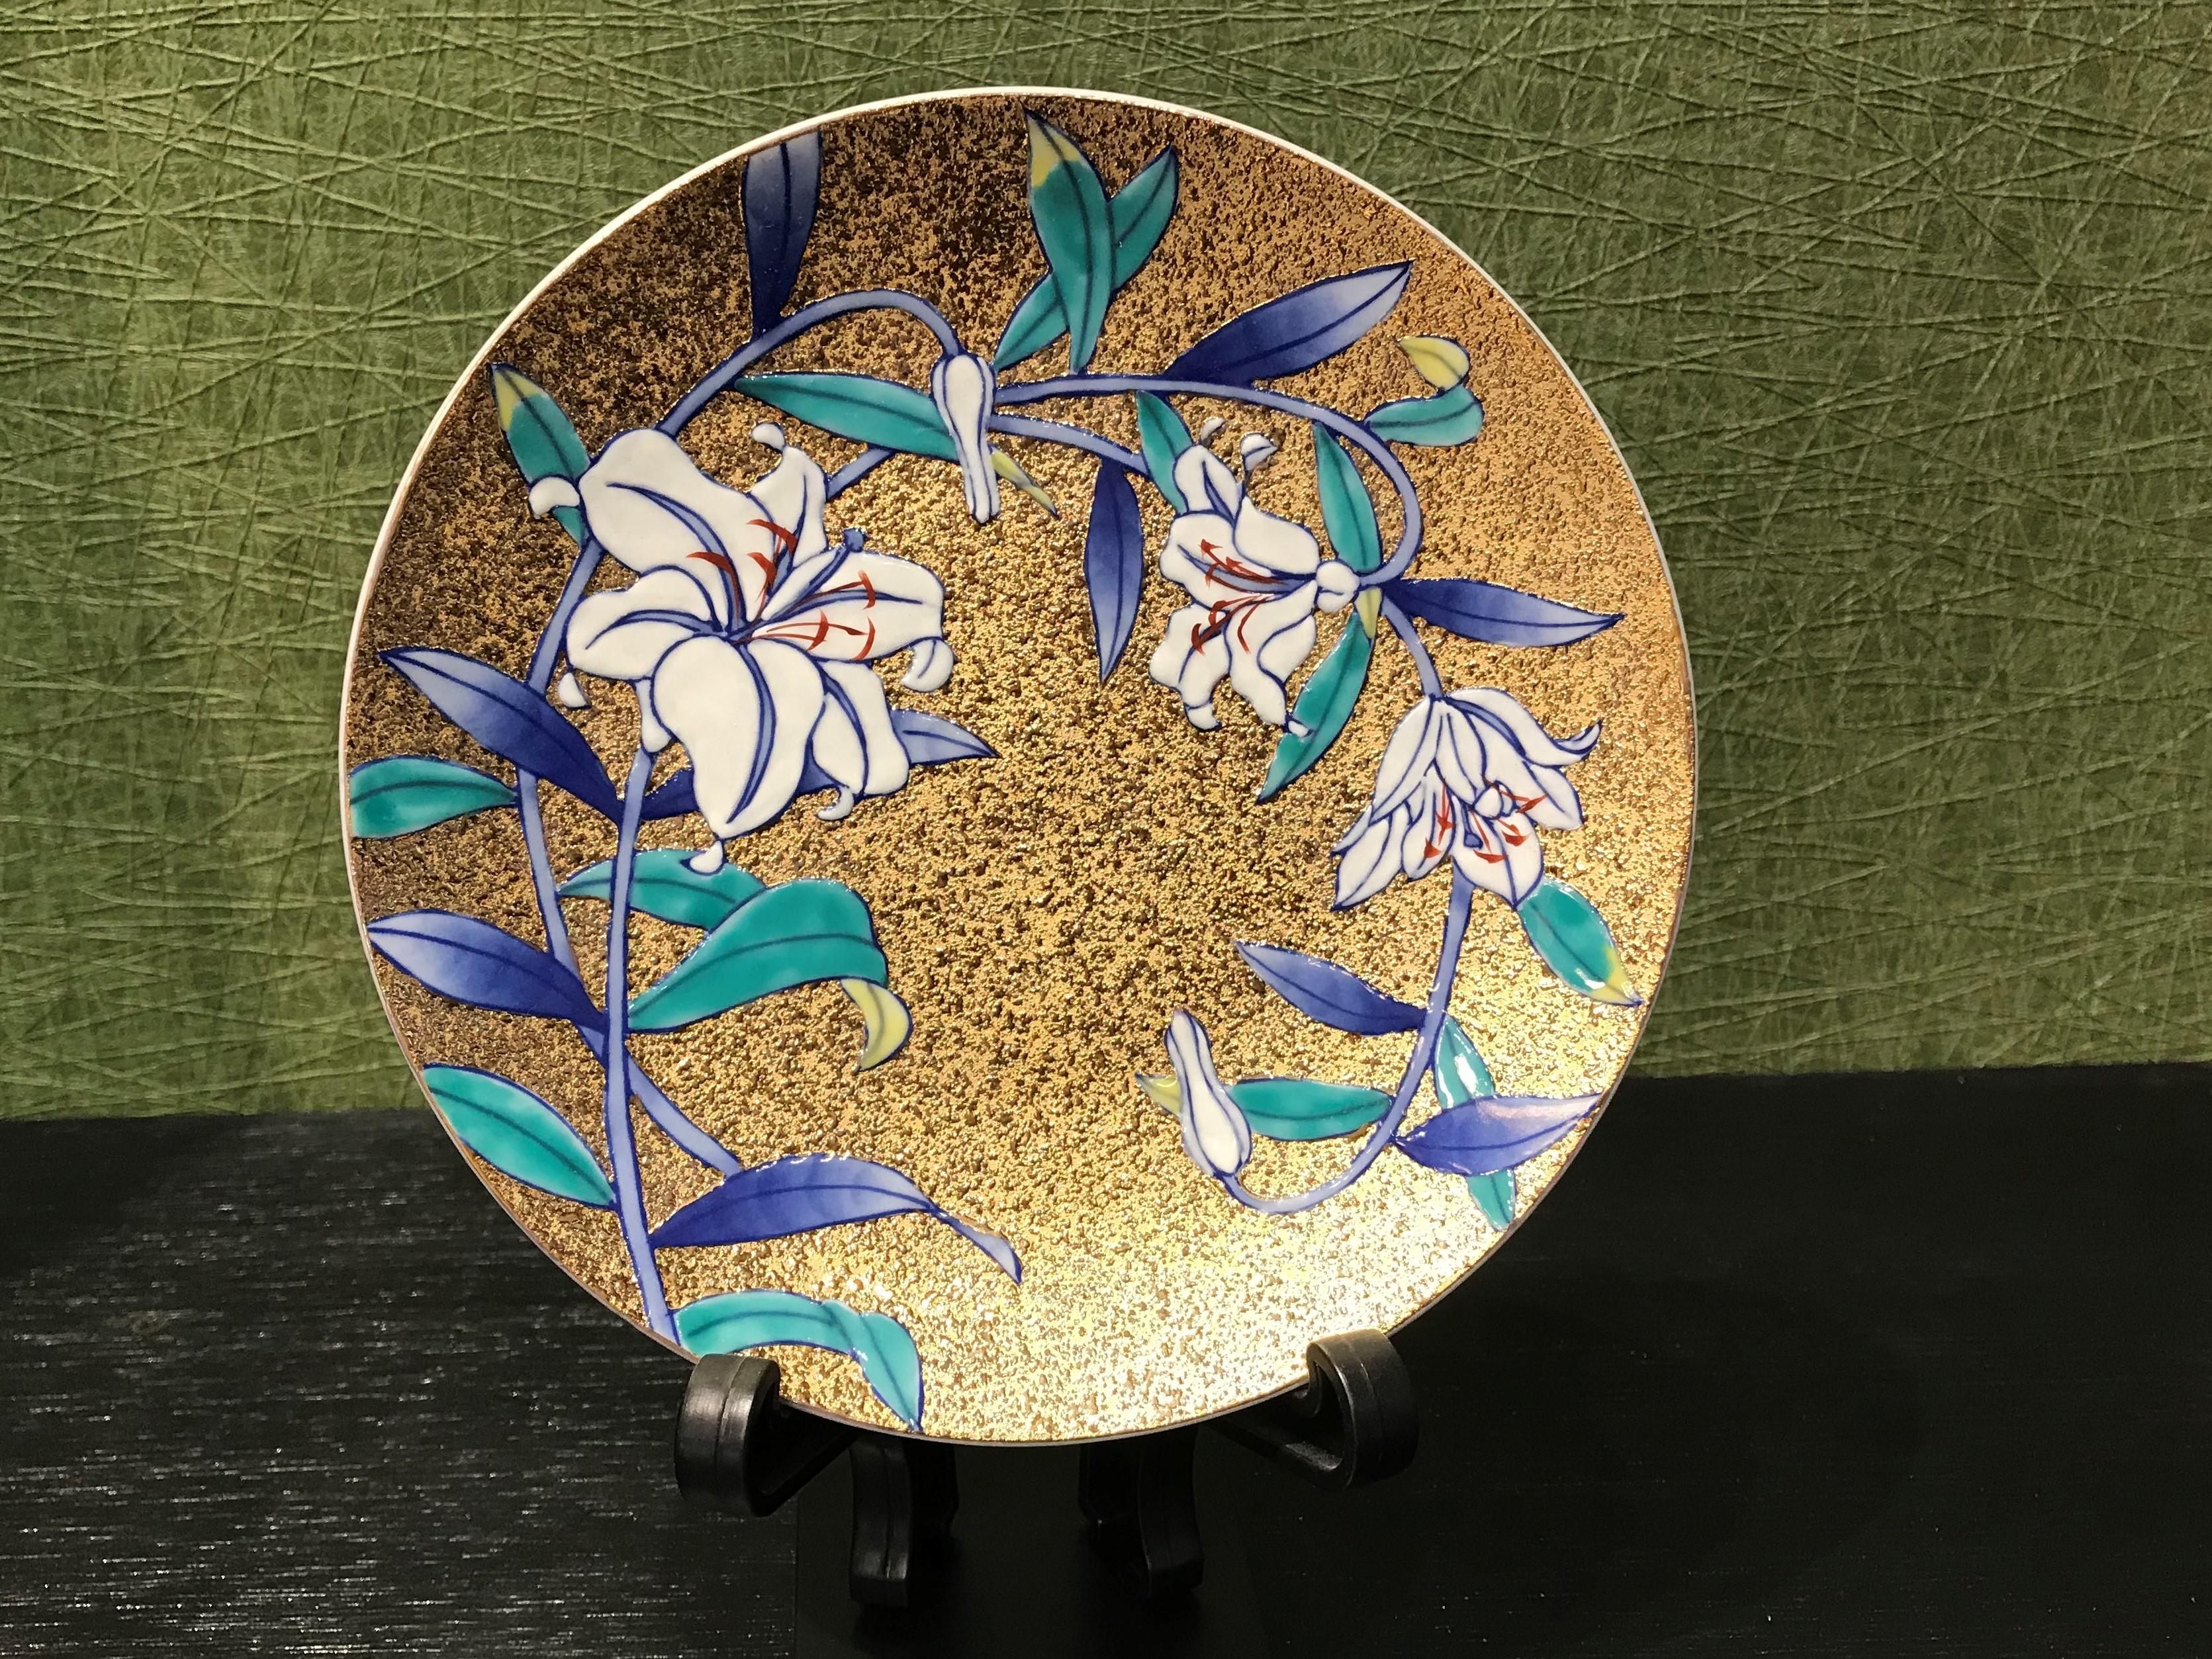 Exquisite contemporary gilded fine porcelain cup and saucer, intricately hand painted in vivid blue, green and white on an attractive gilded body, featuring stunning lilies in full bloom.
This cup and saucer is from a signature series by a highly